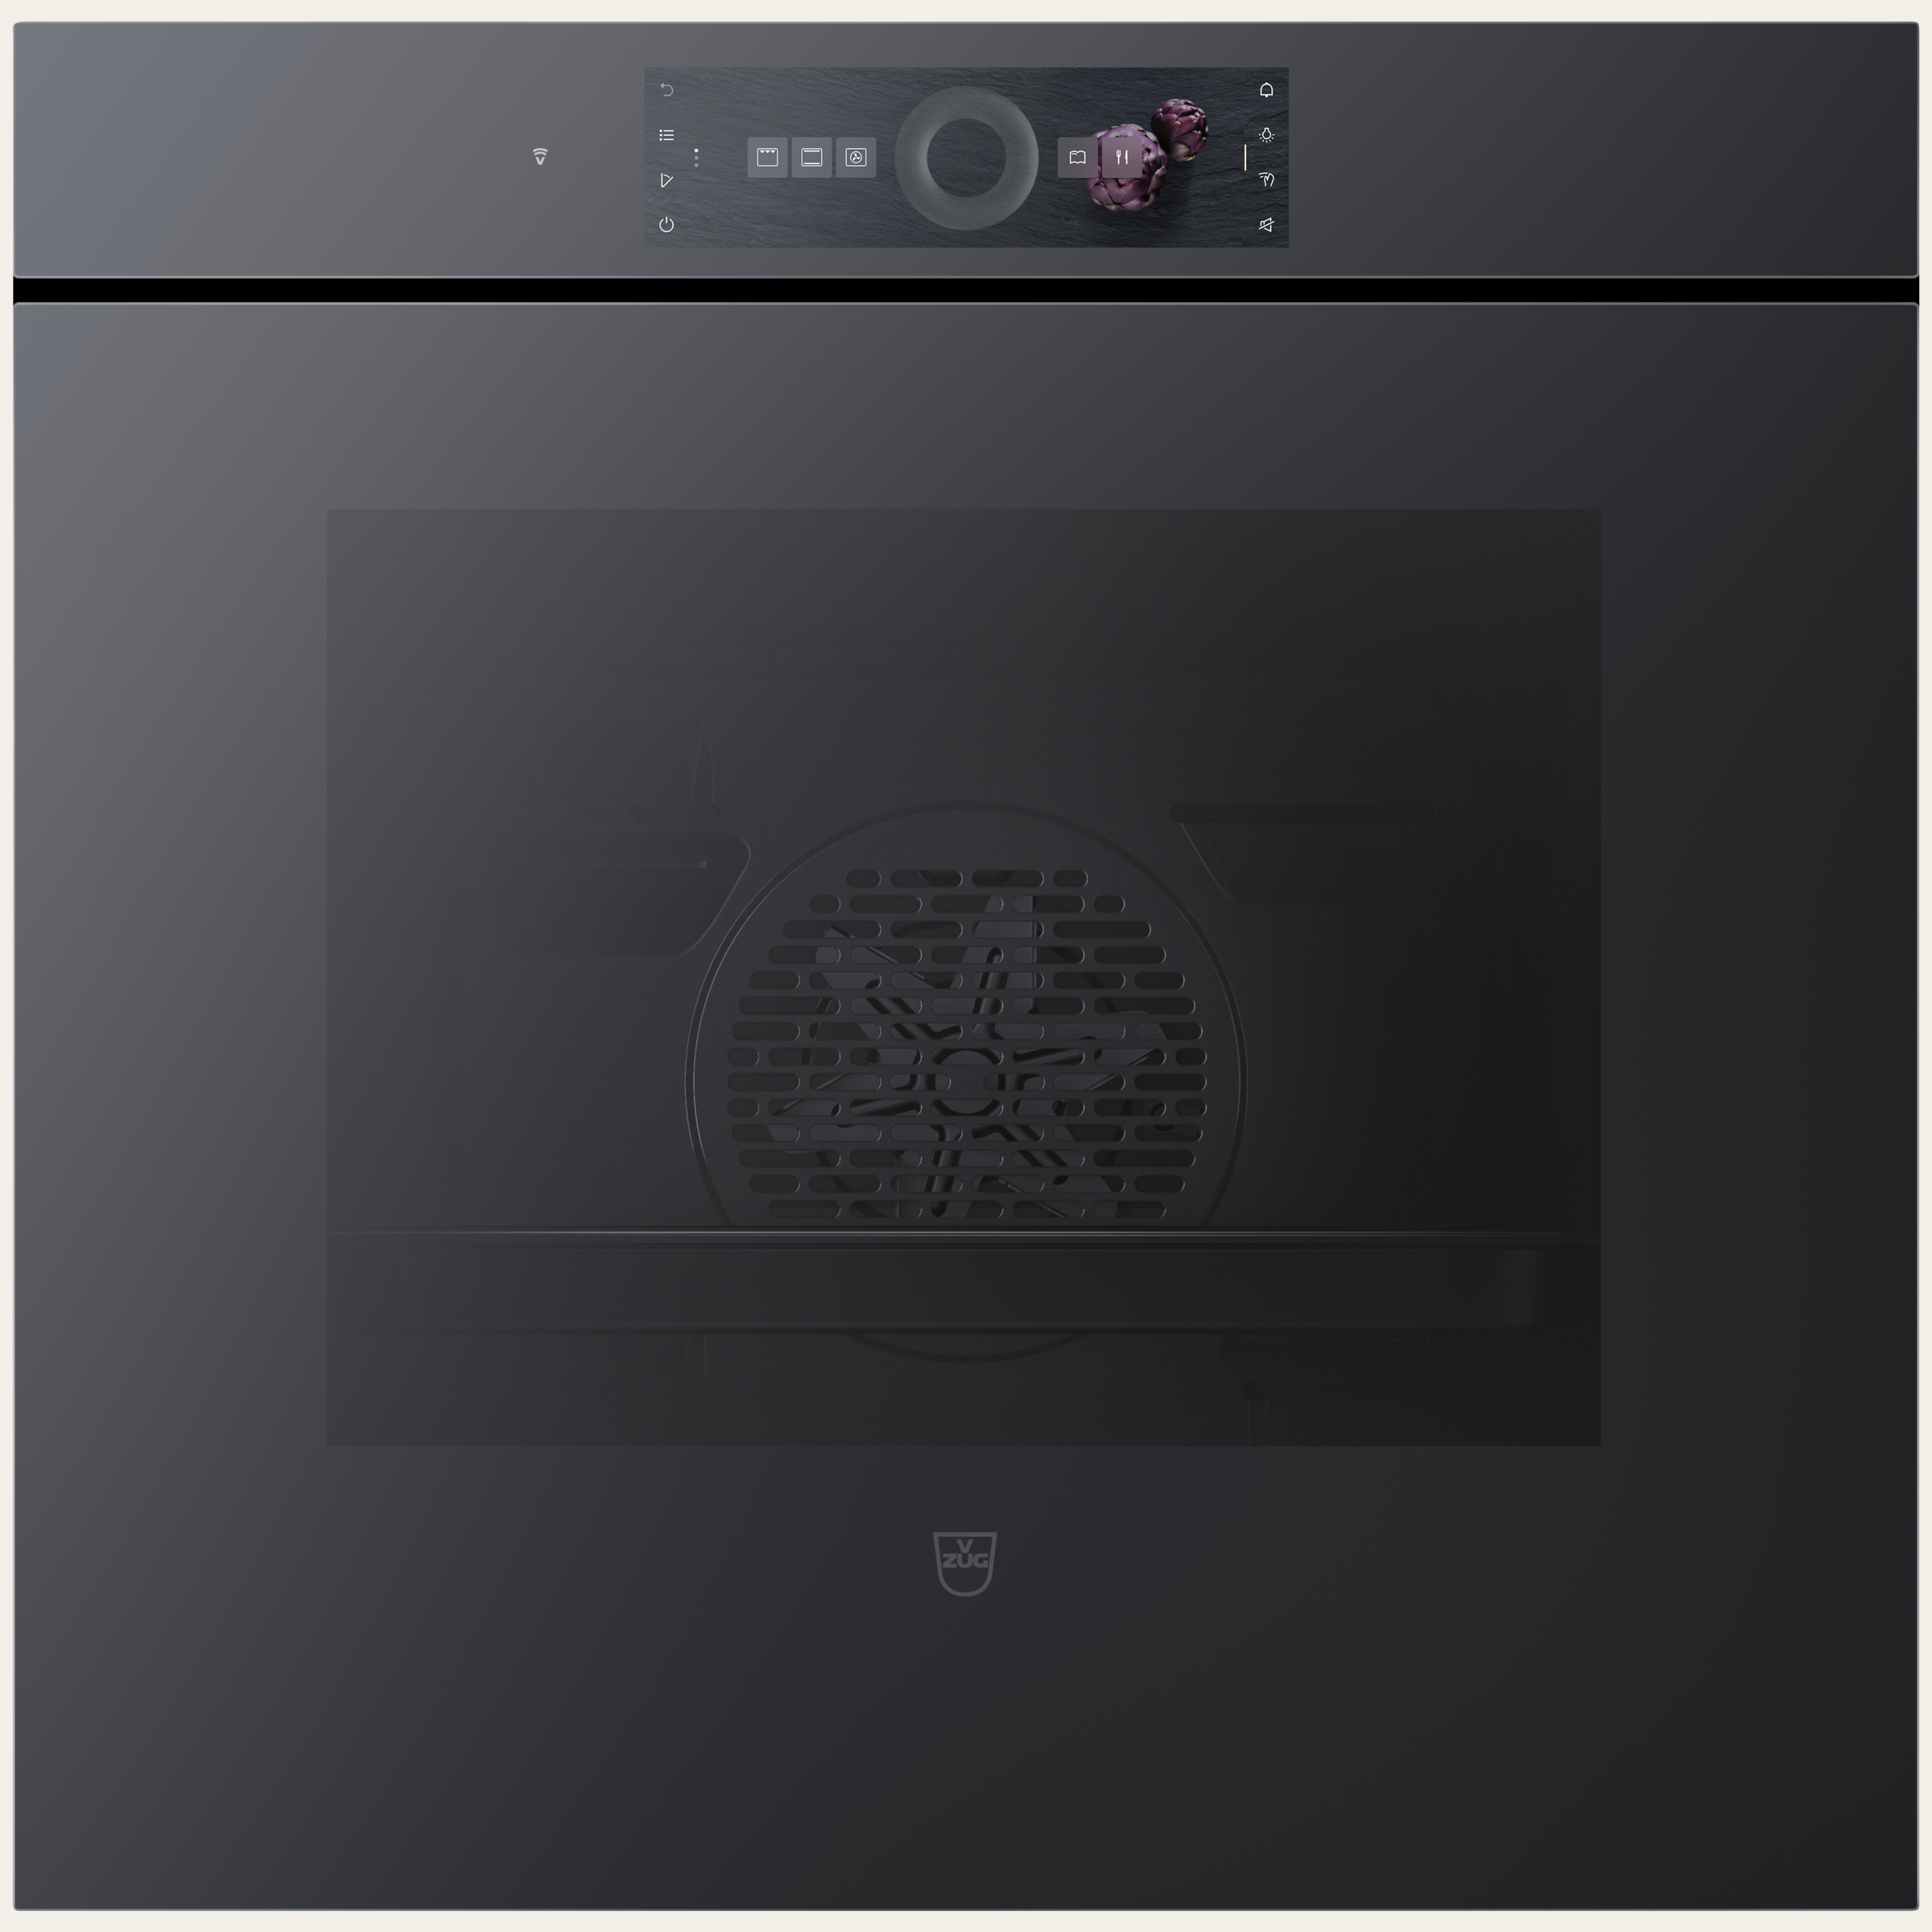 V-ZUG Oven Combair V6000 60, Standard width: 60 cm, Standard height: 60 cm, Black mirror glass, Handle: Handle-free, Touchscreen with CircleSlider, V-ZUG-Home, TopClean